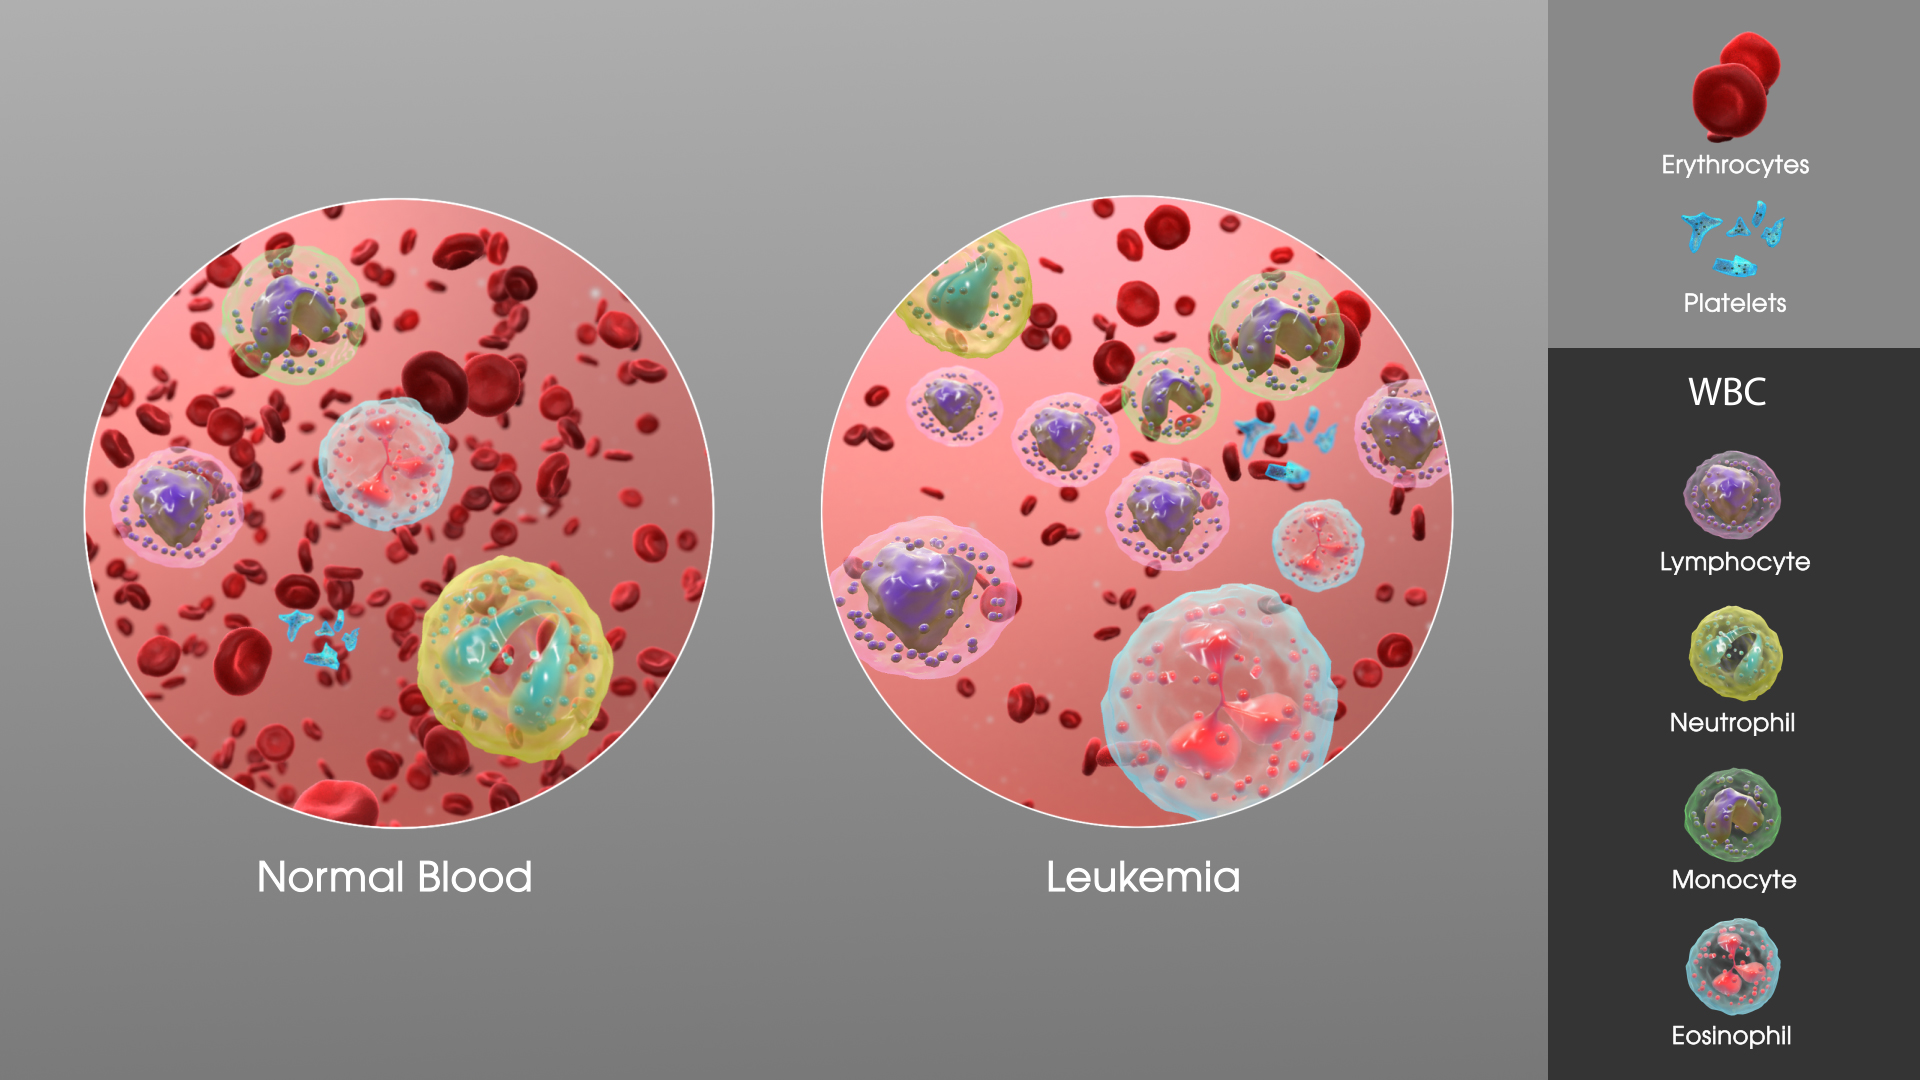 3D Medical Animation still showing comparison between Normal blood and Leukemia